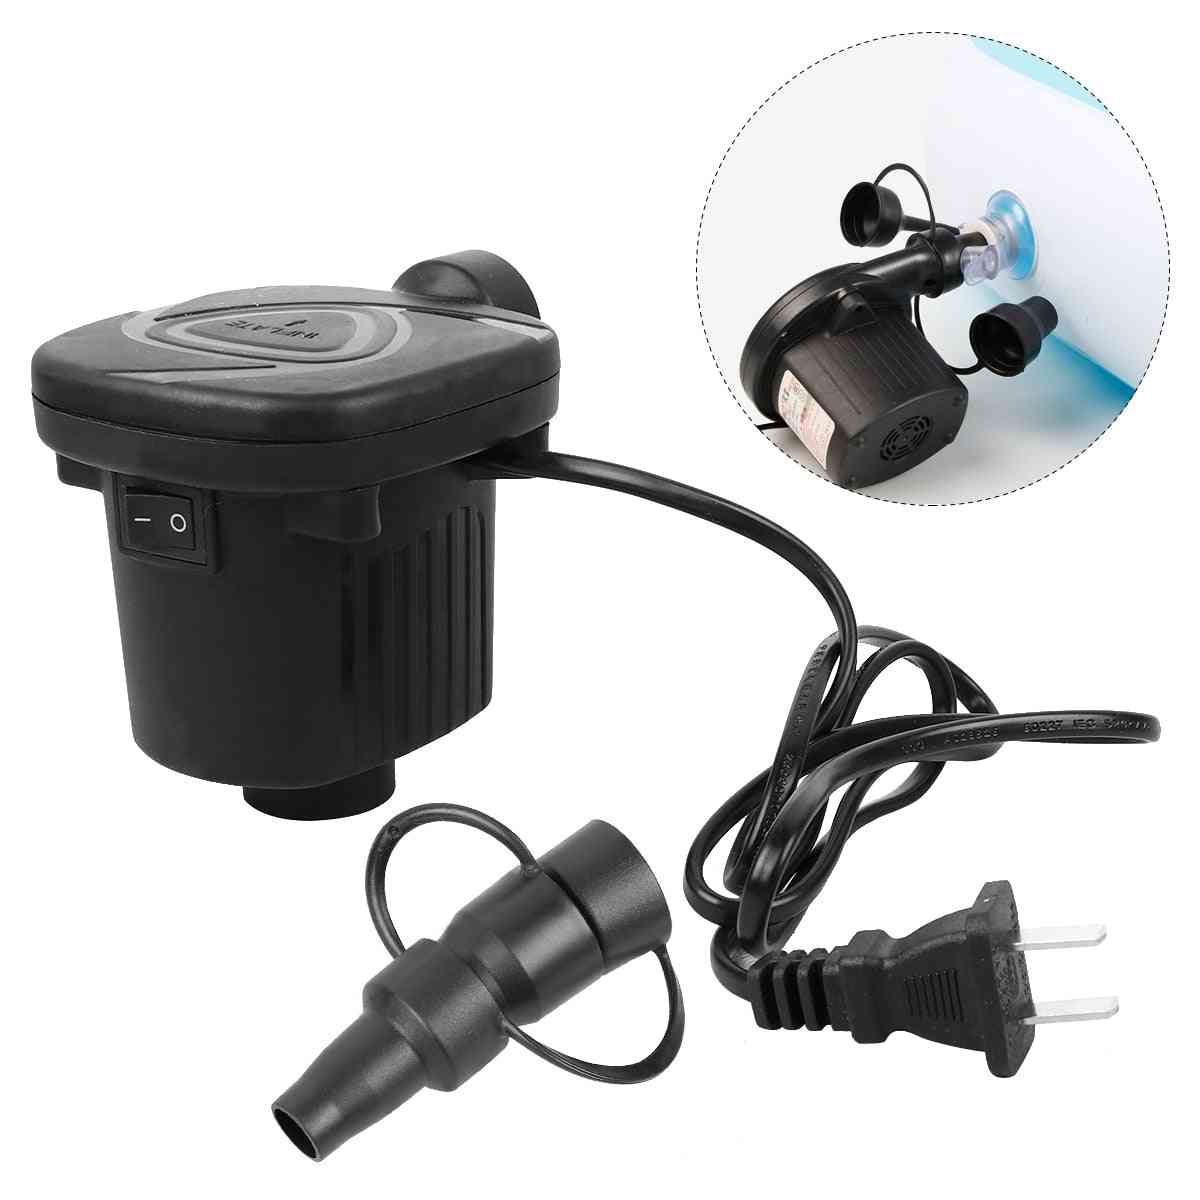 Multifunction Electric Air Pump For Inflatable Boat, Pvc Swimming Pool